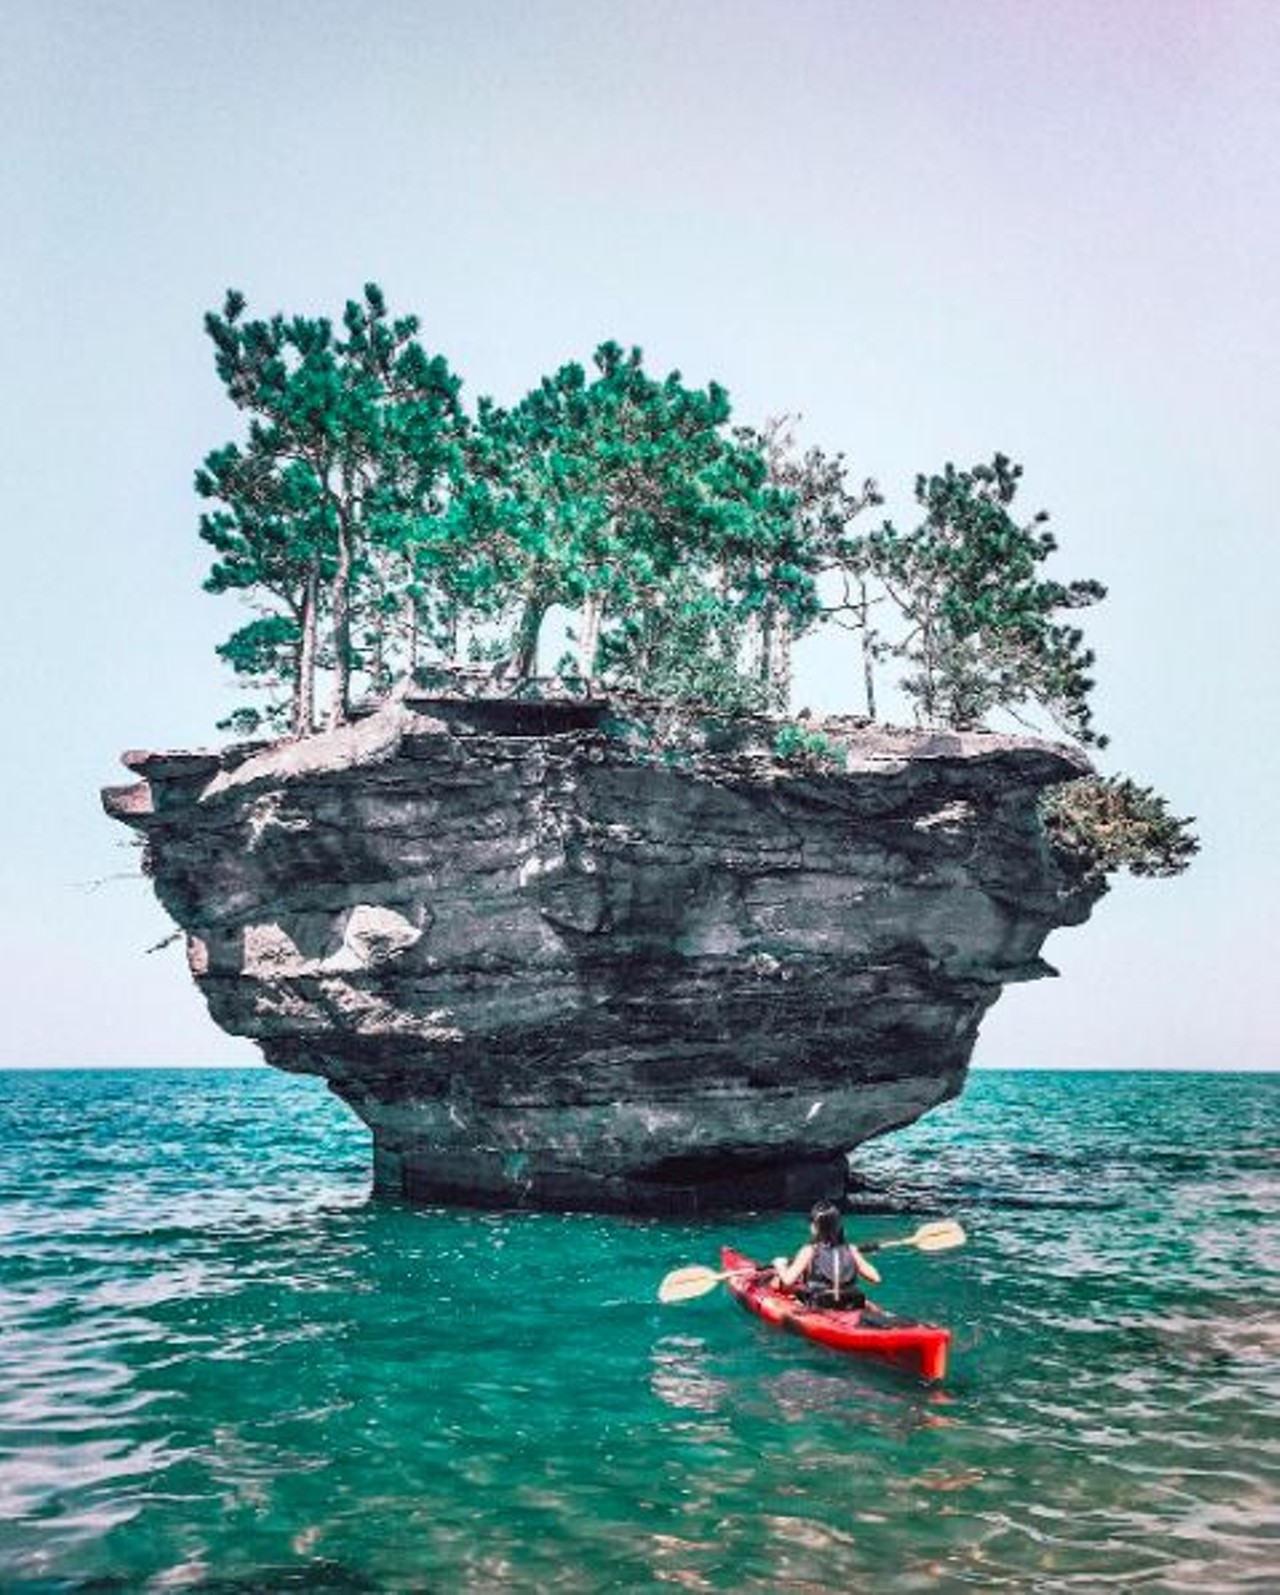 Turnip Rock, Port Austin
A 7 mile out-and-back kayak trip on Lake Huron takes visitors straight to this natural anomaly. As topsy-turvy as it may appear, we promise the stunning fixture won&#146;t come crashing down on you.
Photo via IG user @jaglever